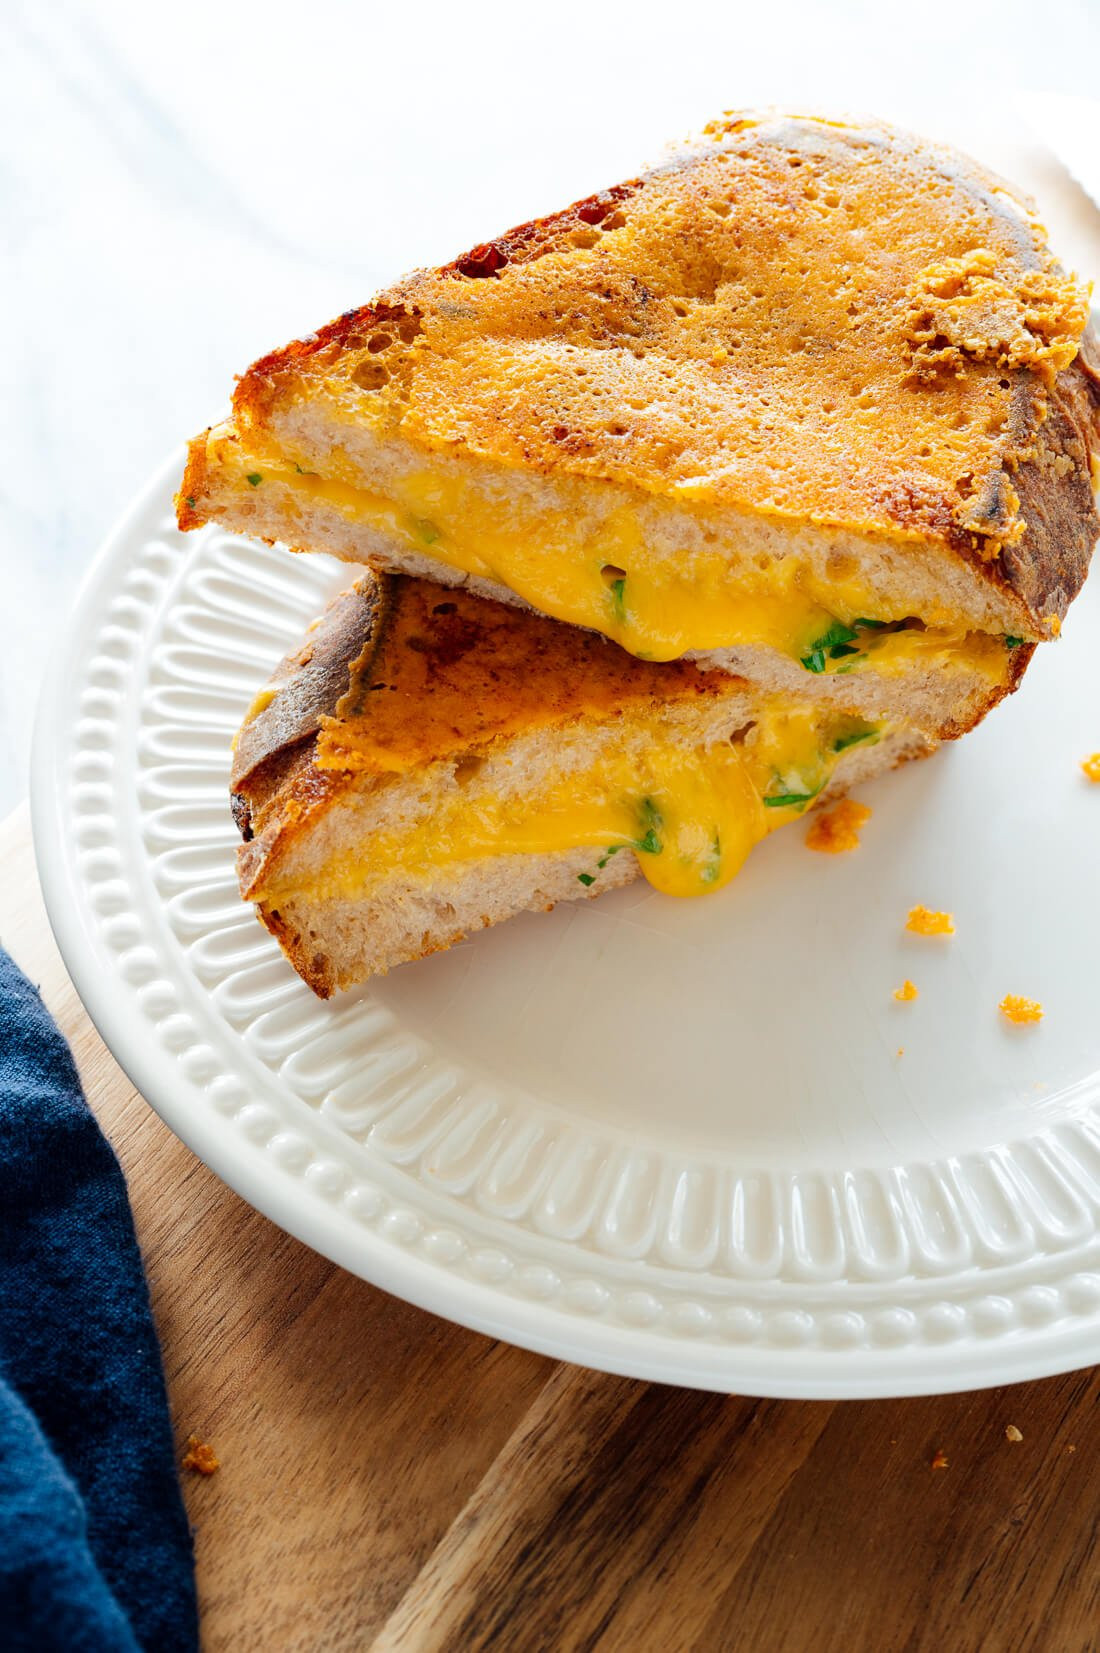 Best Cheese For Grilled Cheese Sandwiches
 Favorite Grilled Cheese Sandwich Recipe Cookie and Kate